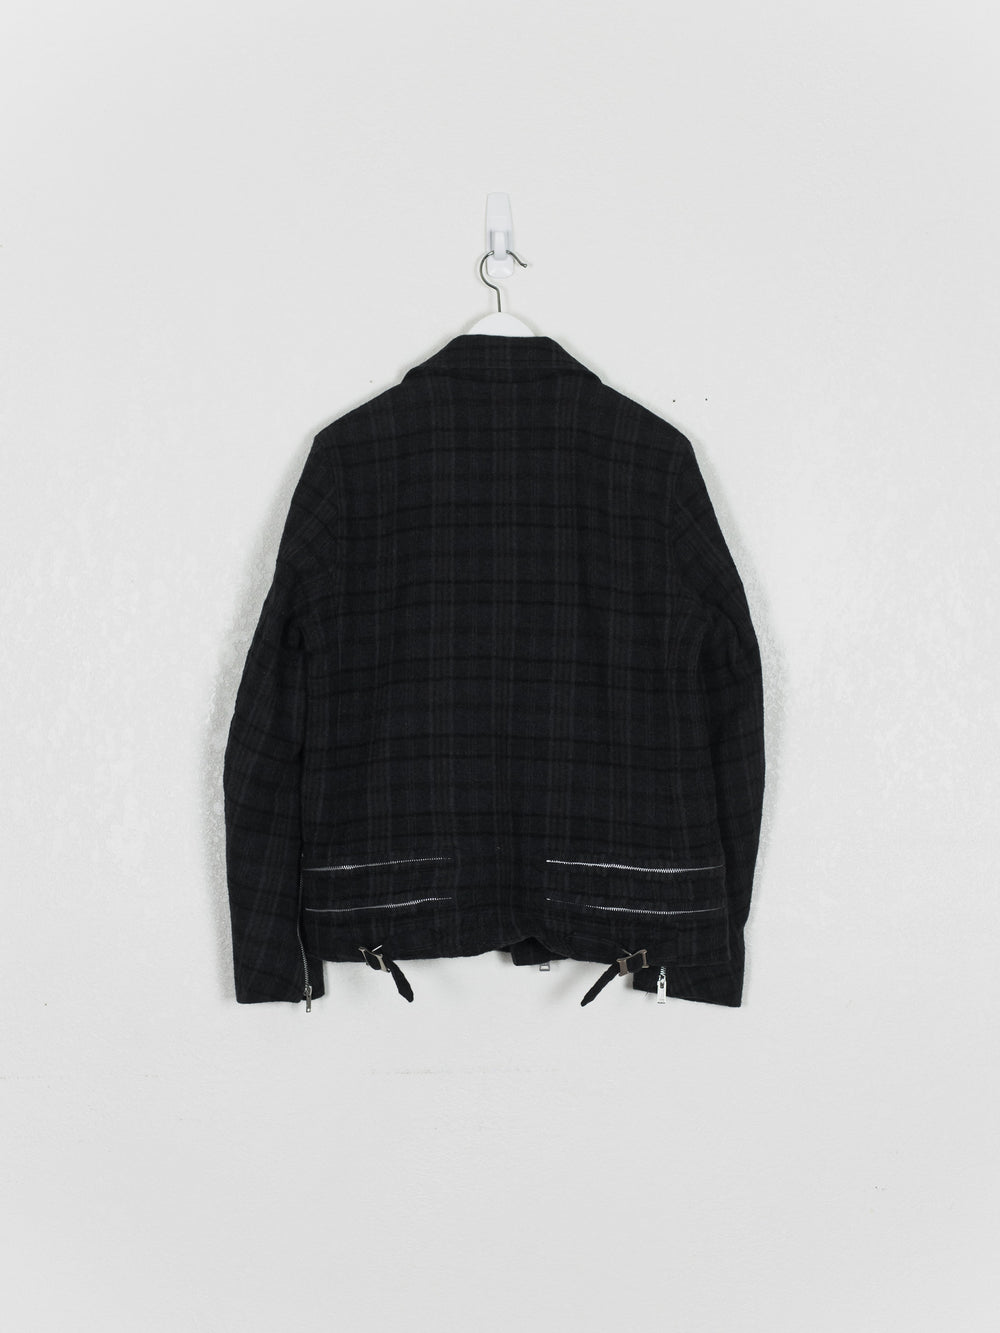 Undercover AW13 Wool Flannel Double Rider